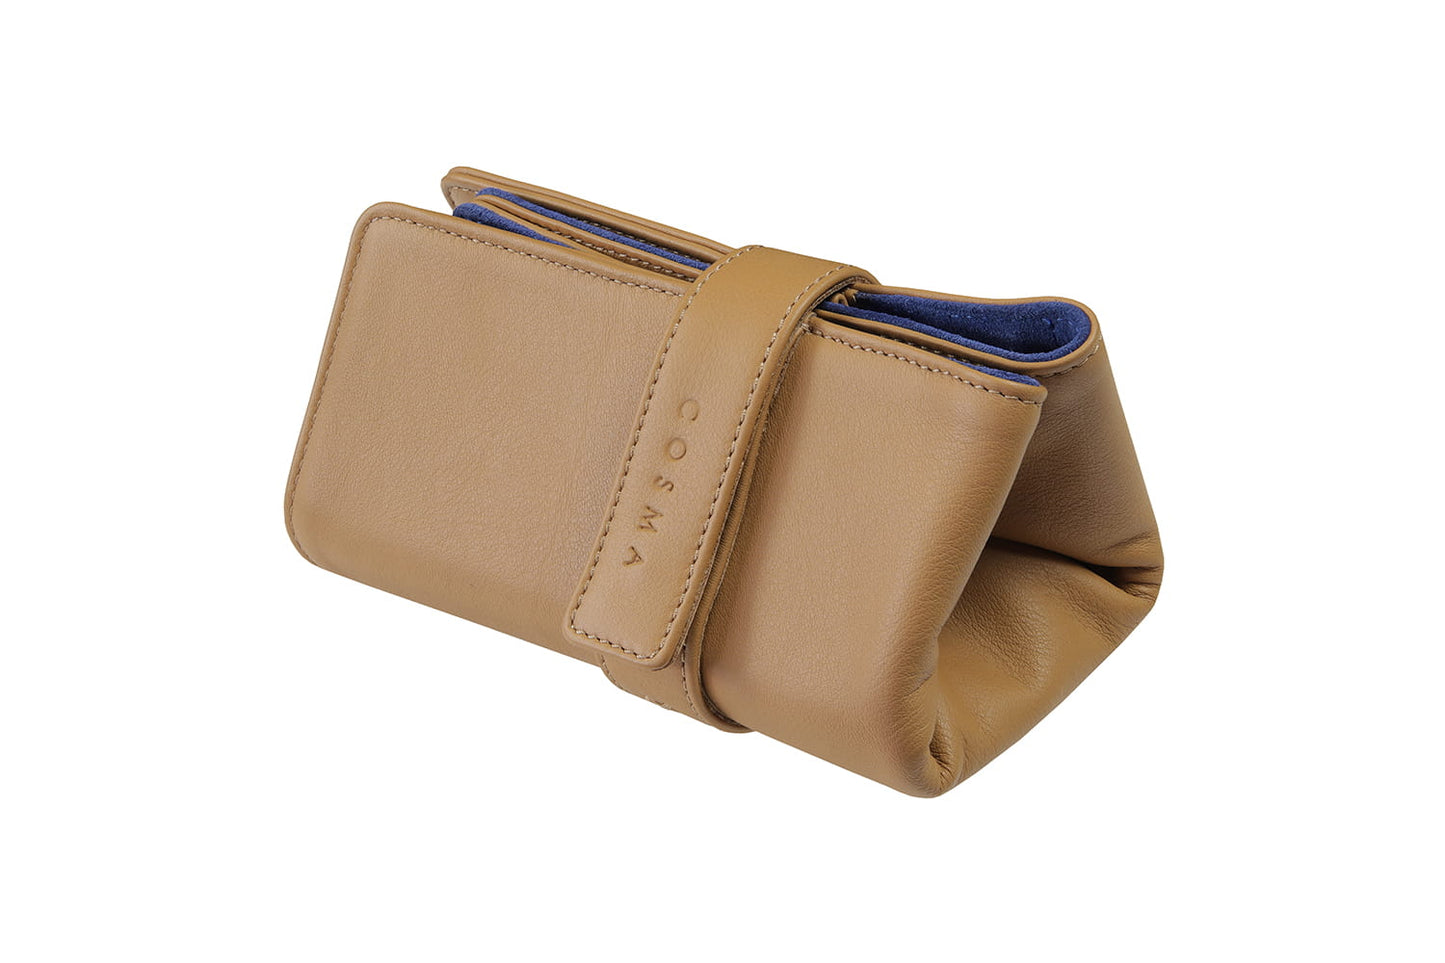 Leather Watch Pouch for 3 watches - Light Brown / Royal Blue